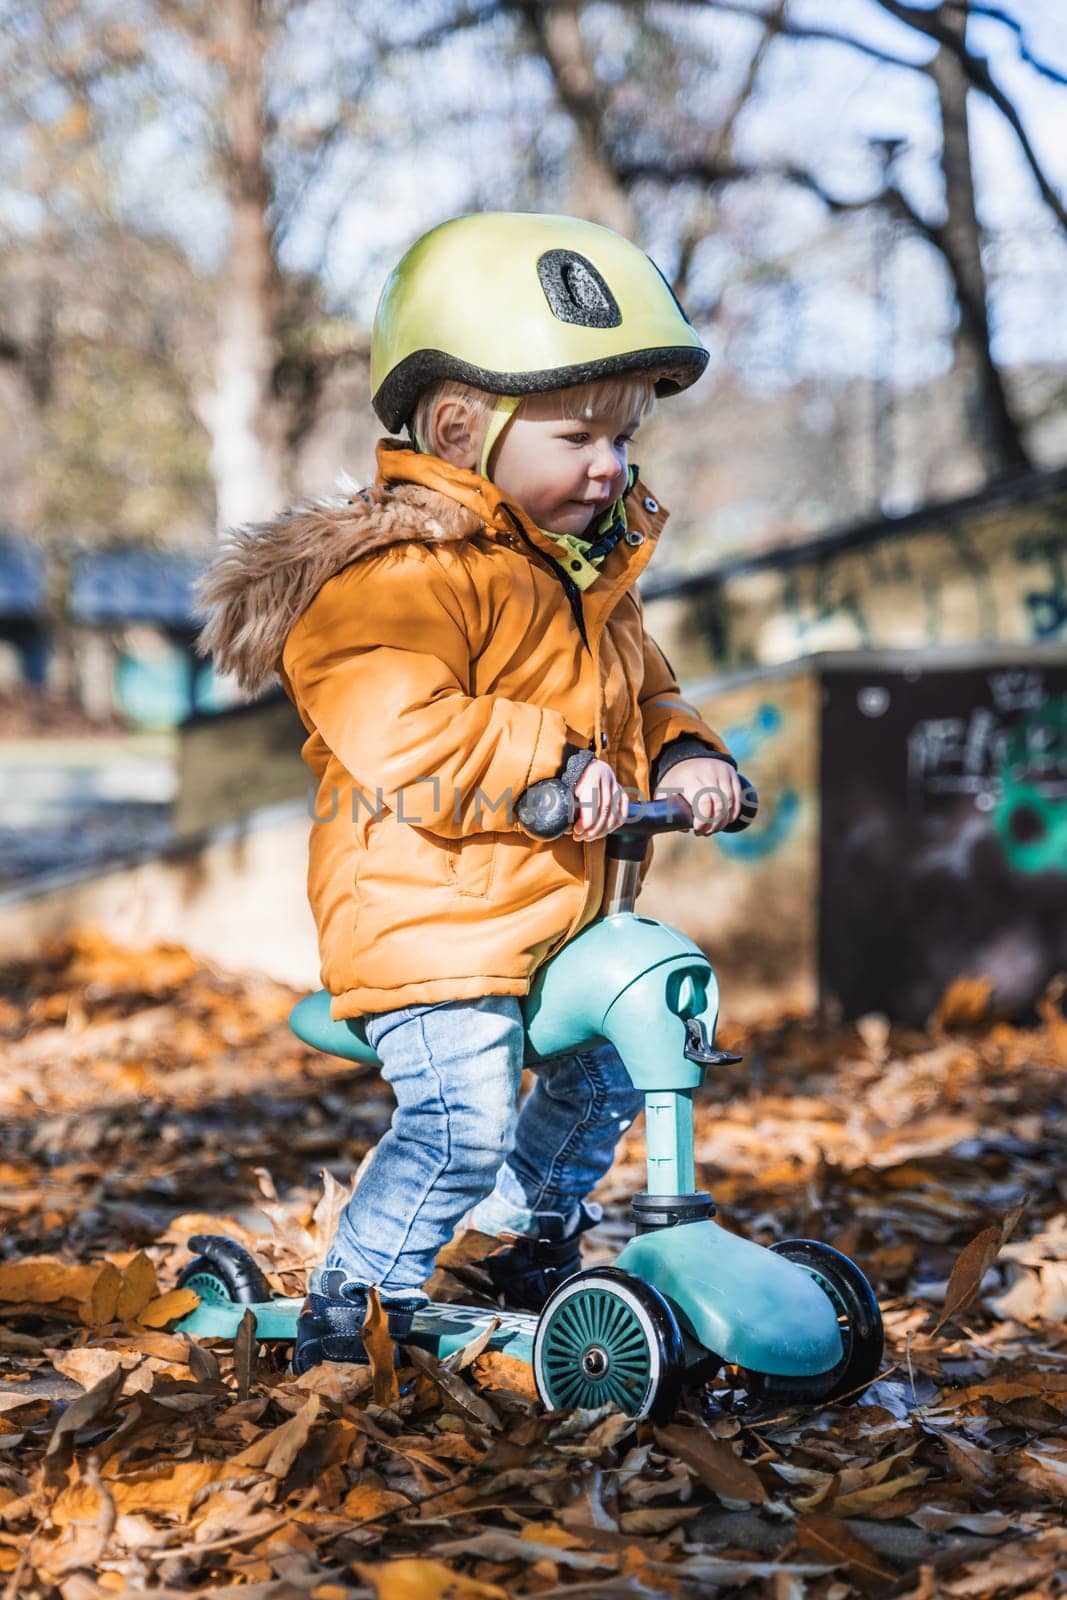 Adorable toddler boy wearing yellow protective helmet riding baby scooter outdoors on autumn day. Kid training balance on mini bike in city park. Fun autumn outdoor activity for small kids. by kasto